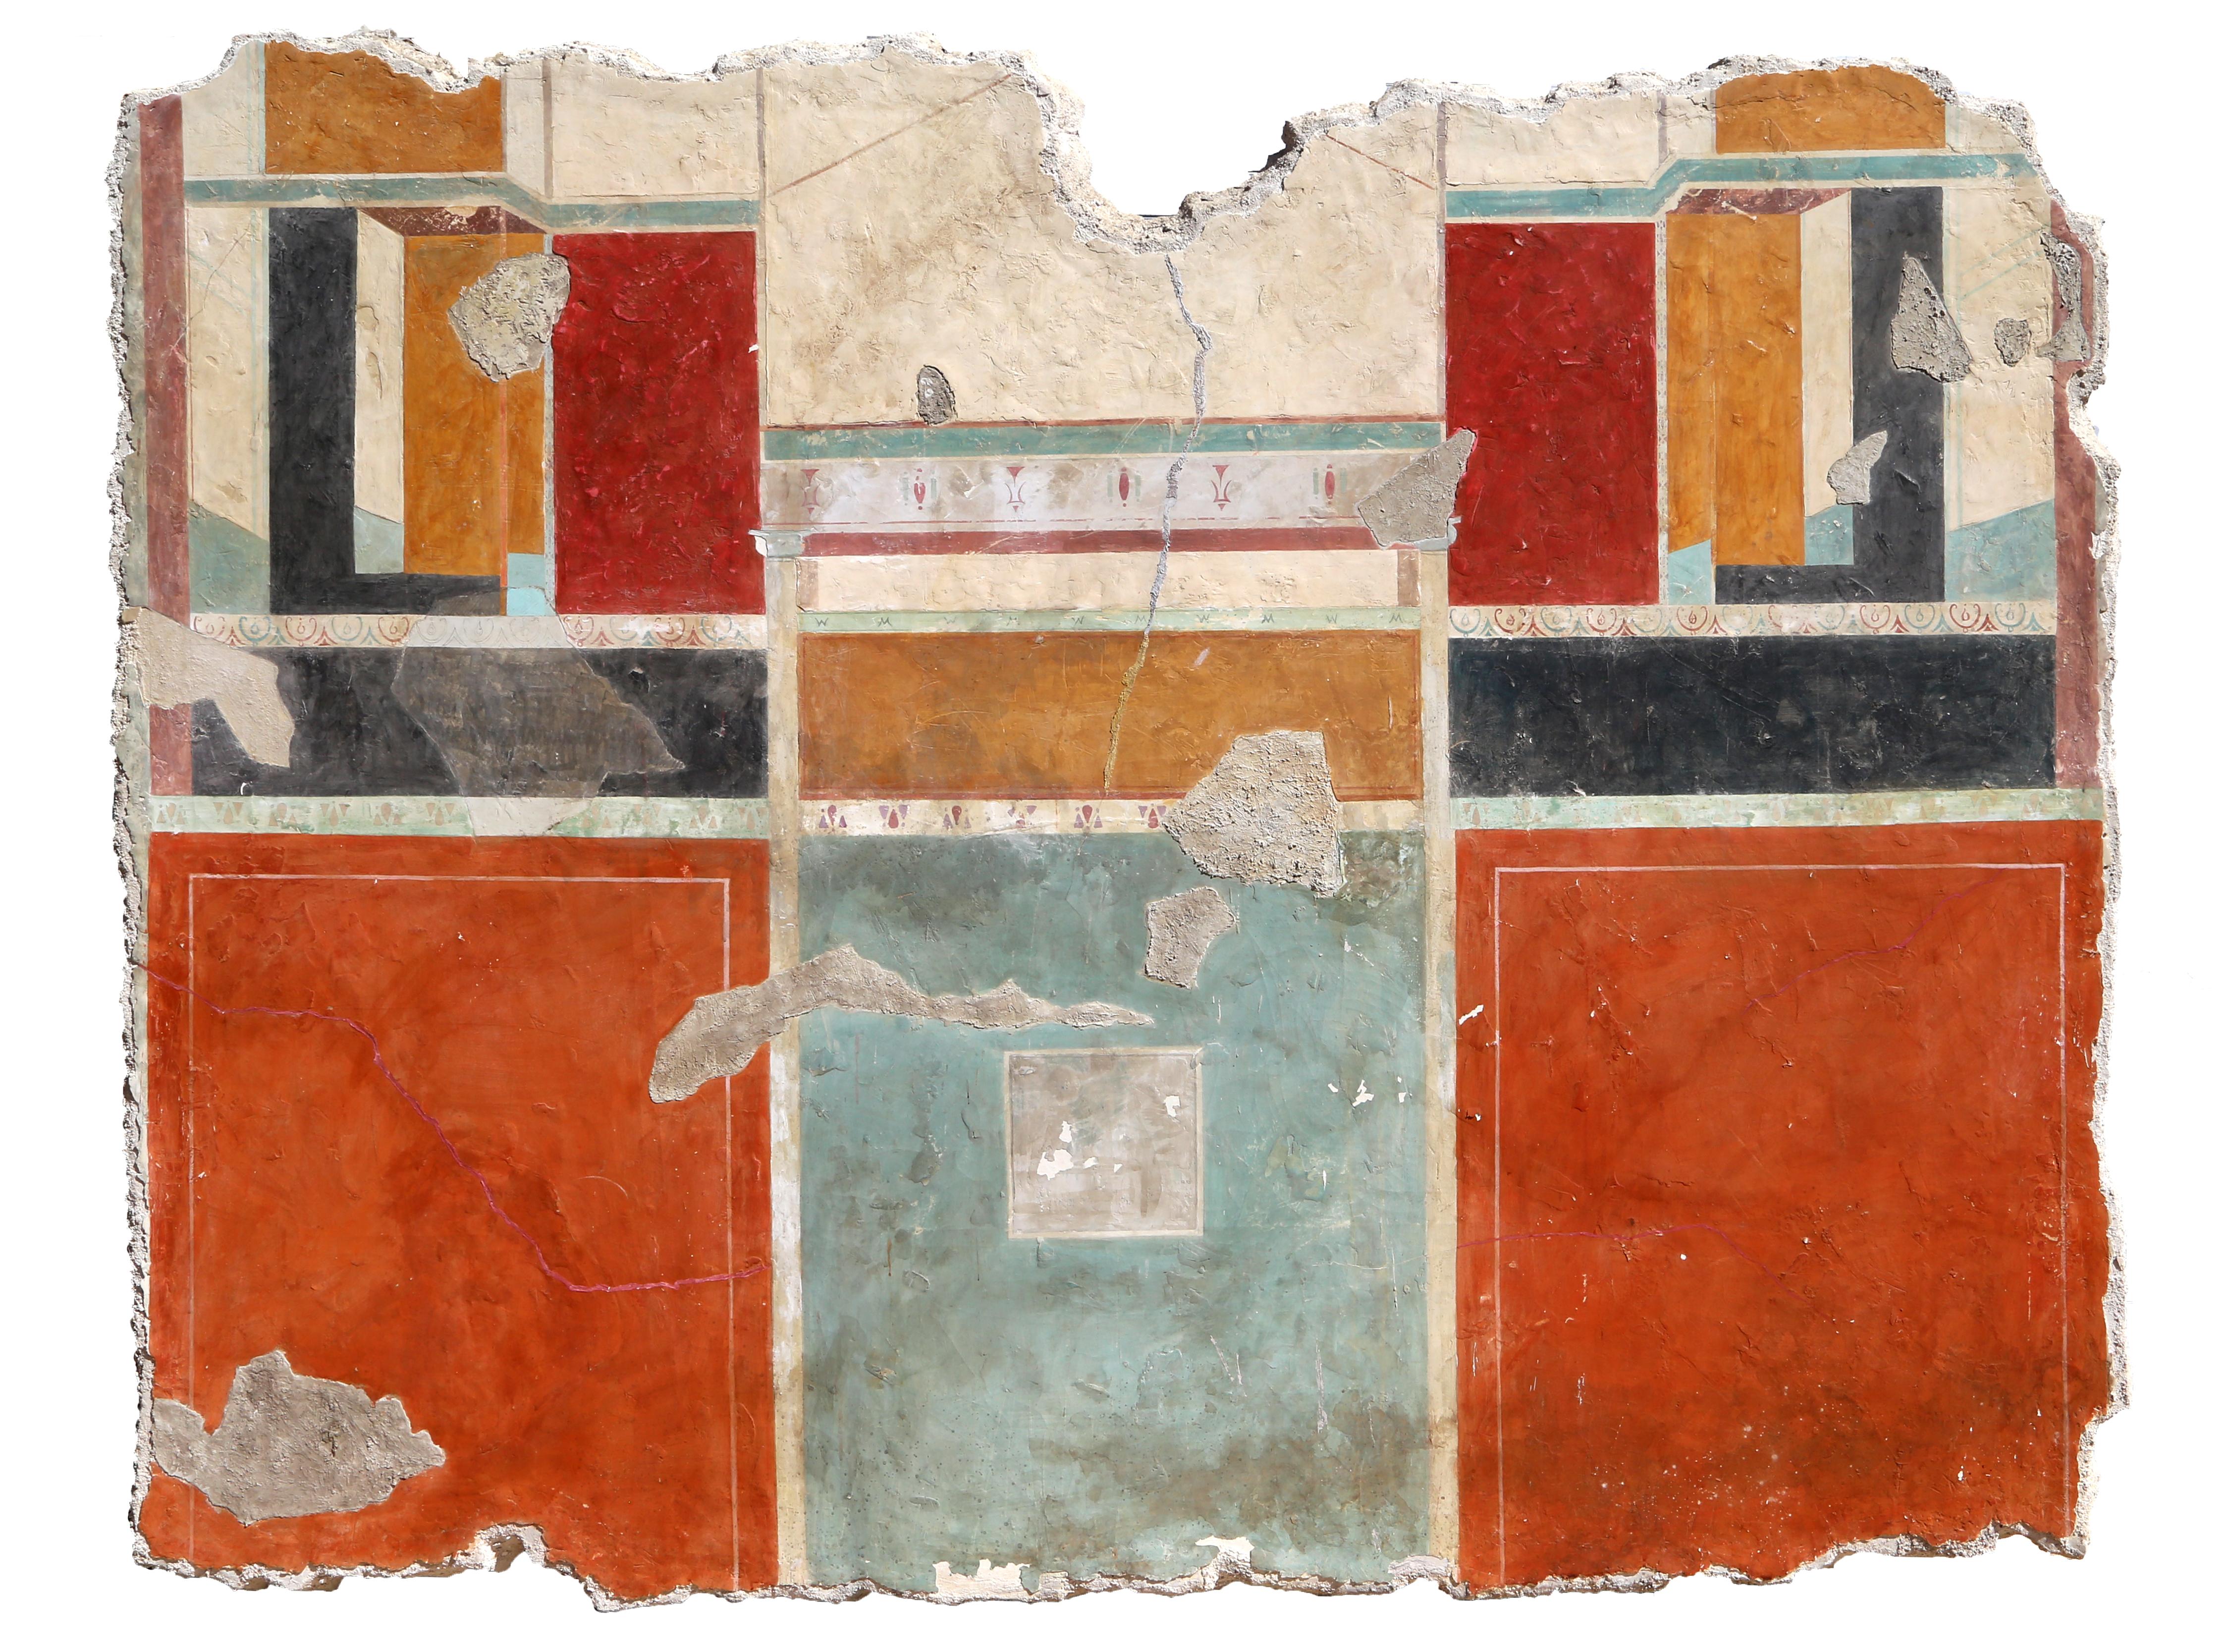 Peter Saari is an American artist who's work aims to re-invent antiquity through recreating ancient wall paintings and decoration. Provenance: Lamanga Gallery, NYC